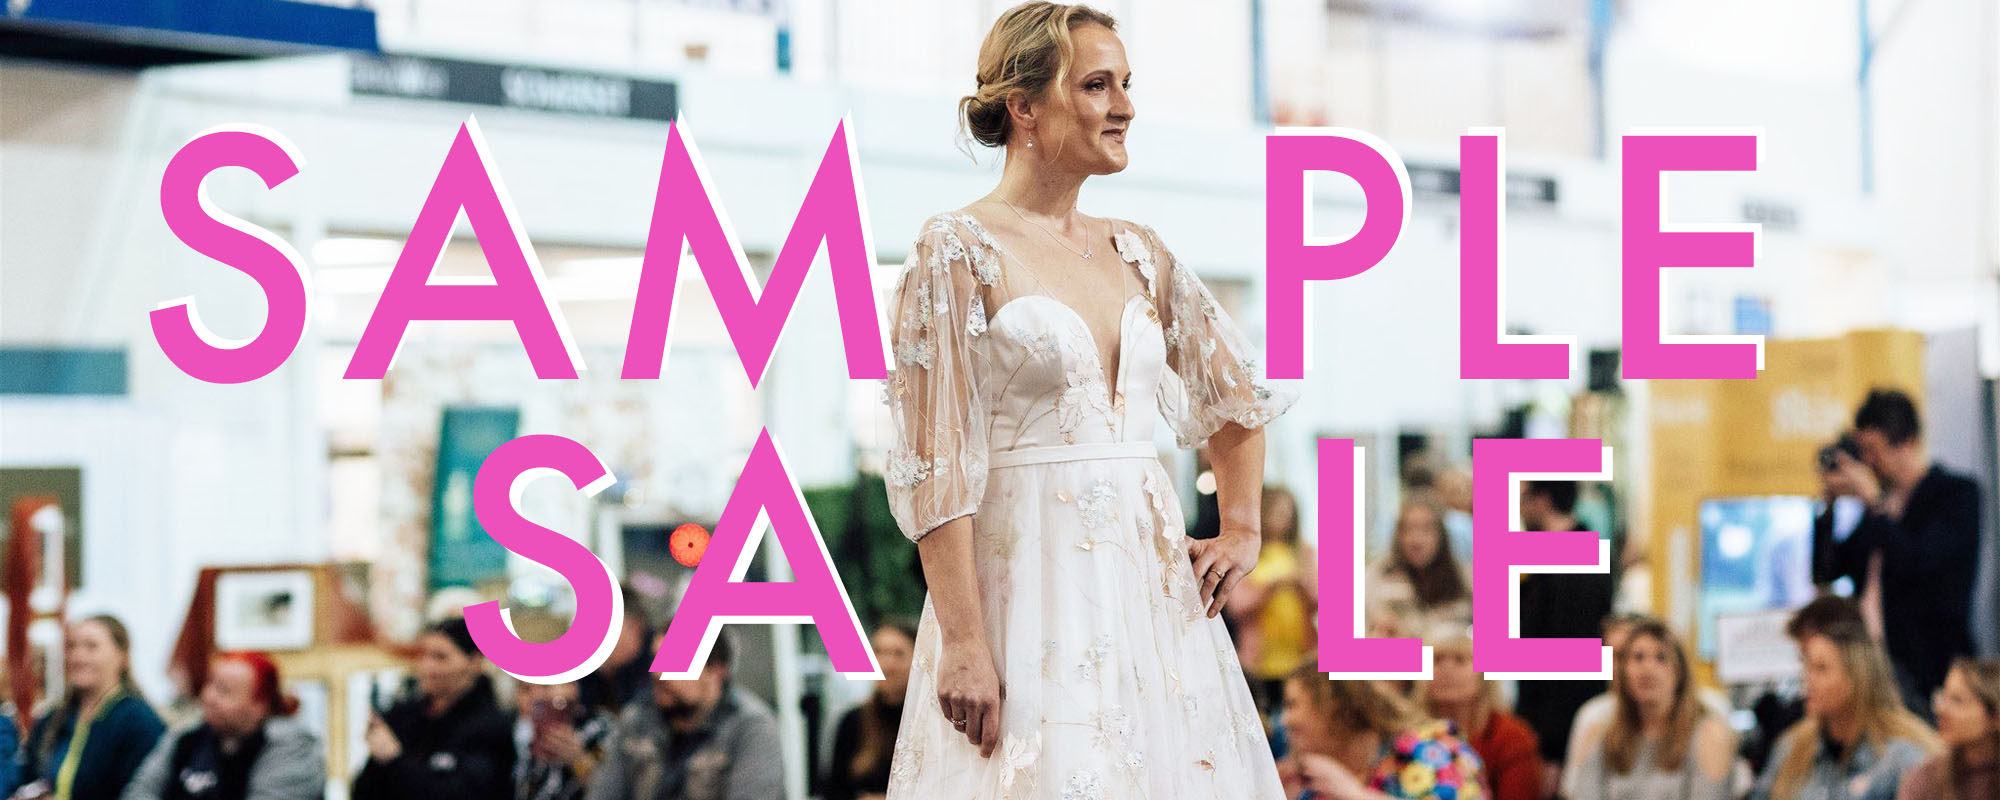 Allum & sidaway Bridal - Sizzling Savings in our Summer Sample Sale